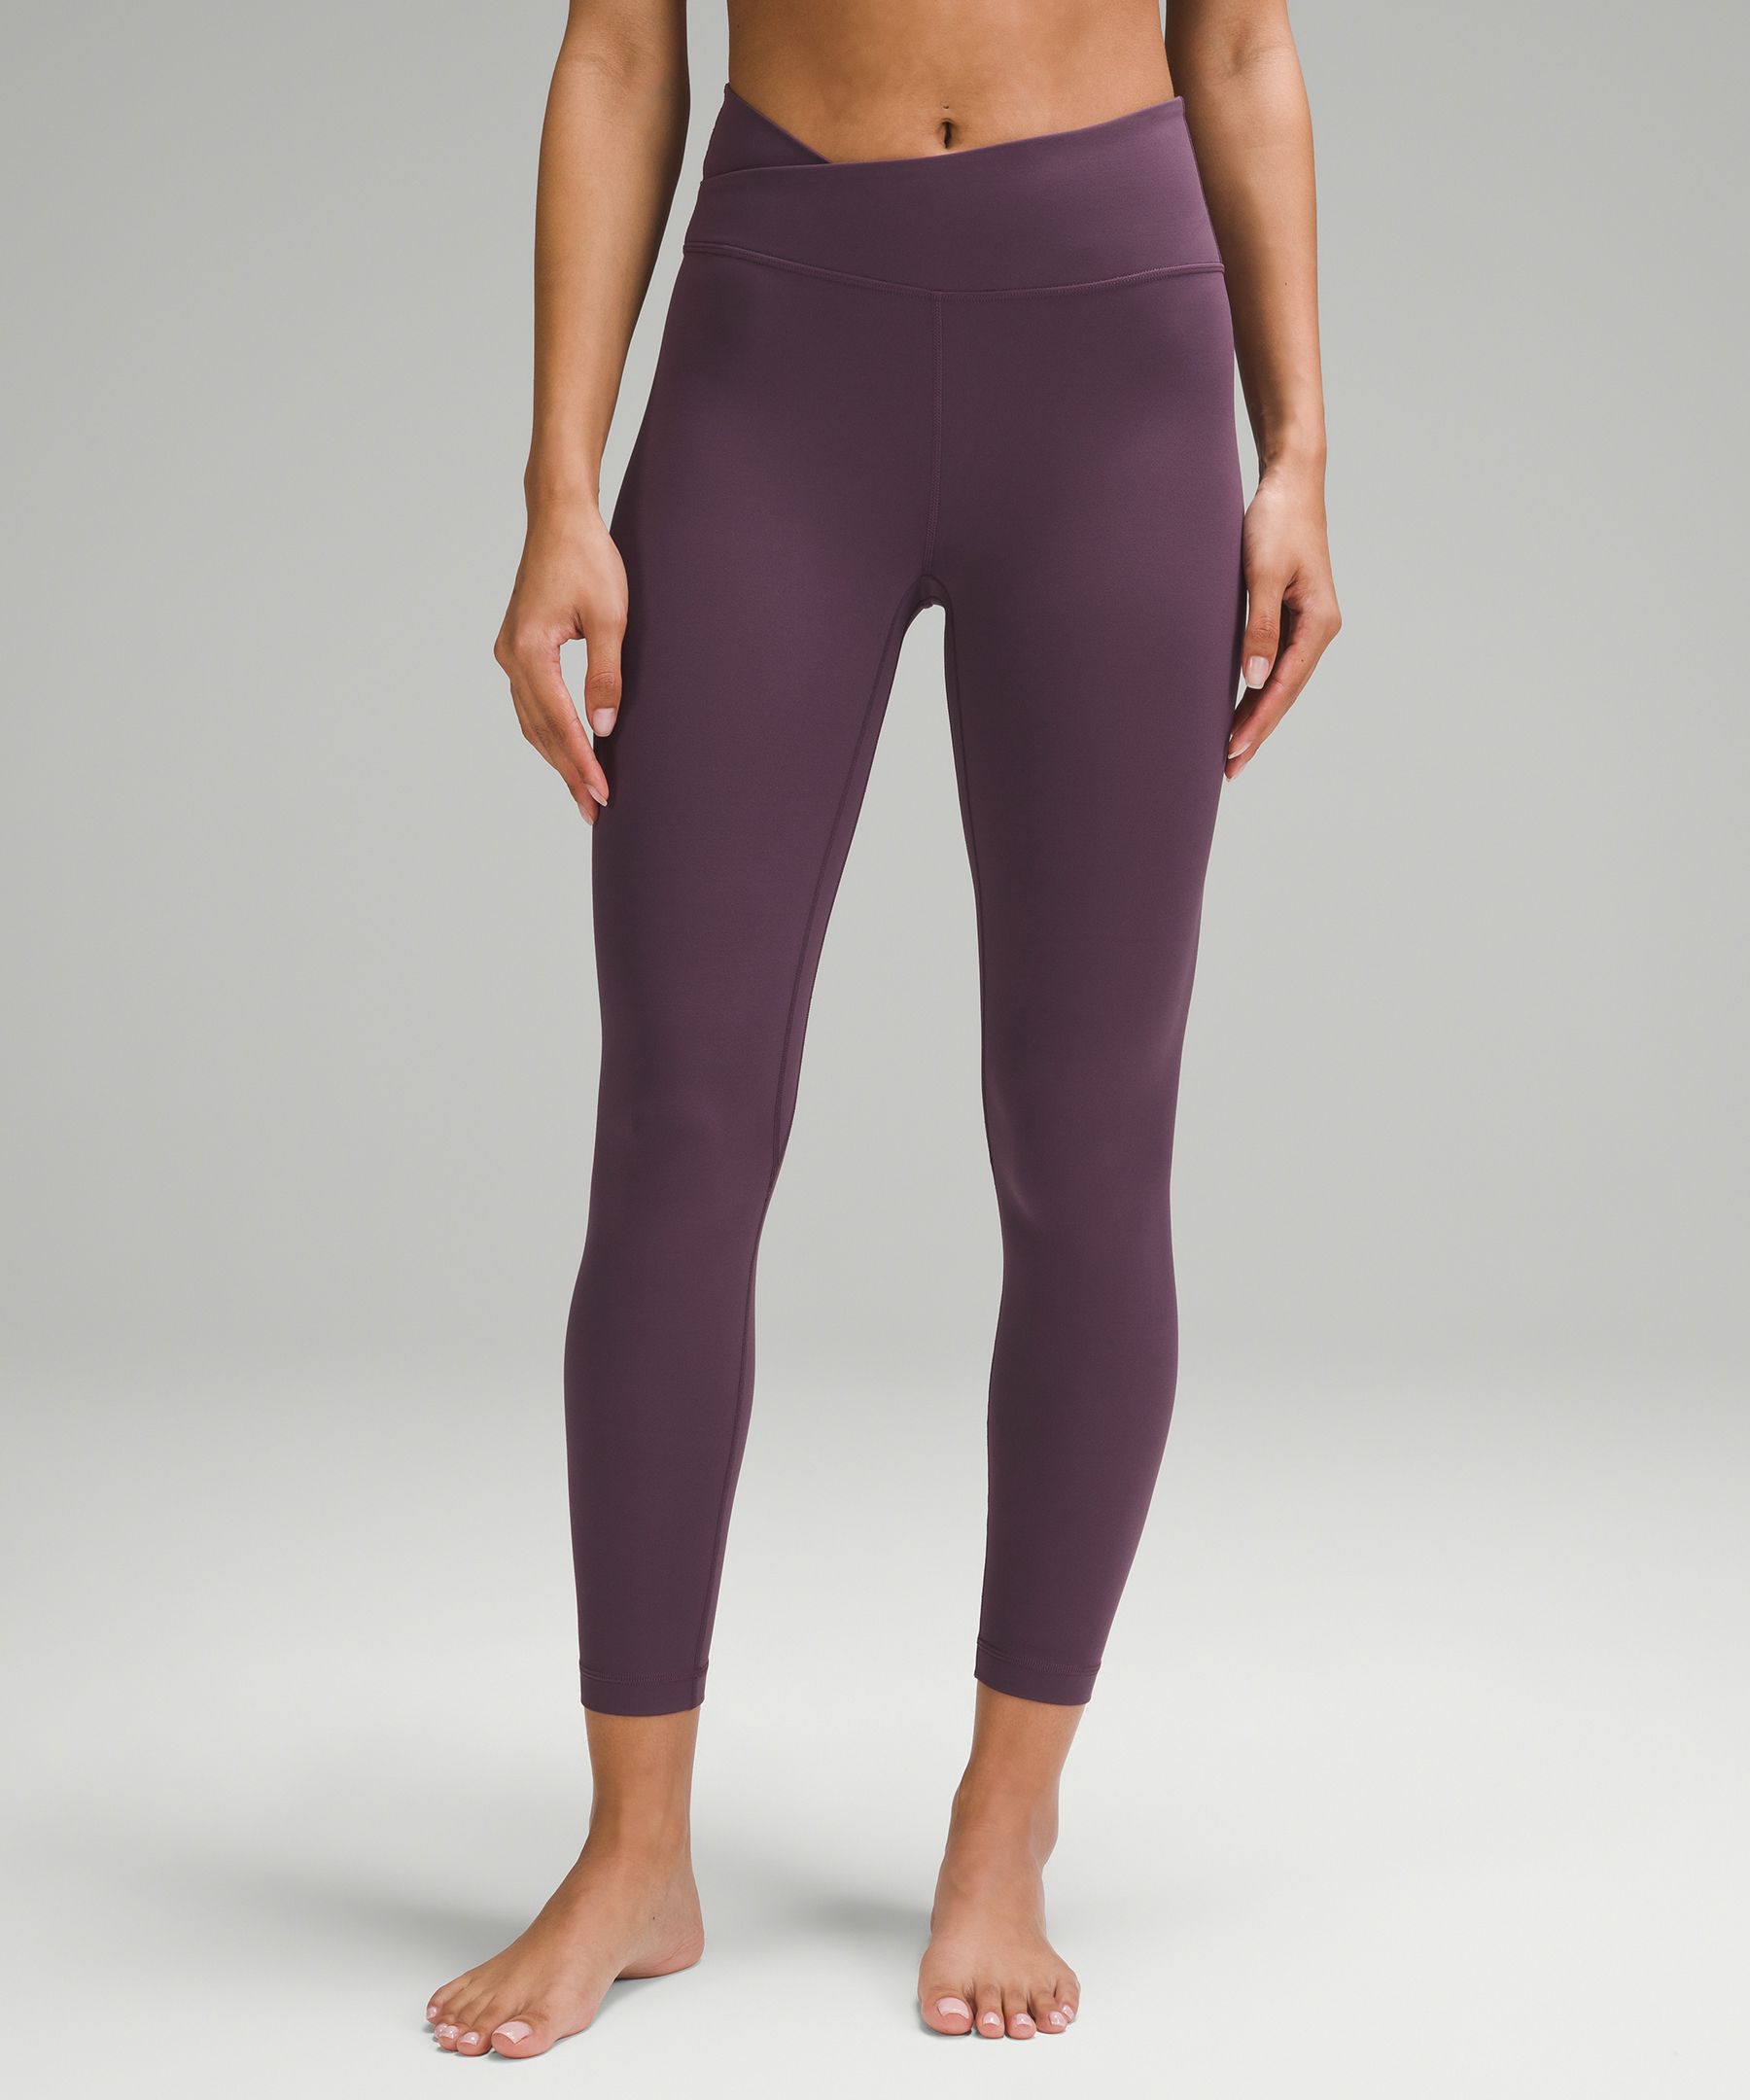 Lu Align Womens Seamless Yoga Leggings High Rise, Lightweight, Quick Dry  Sports Direct Yoga Pants For Summer Jogging From Yoganiceonline, $4.48